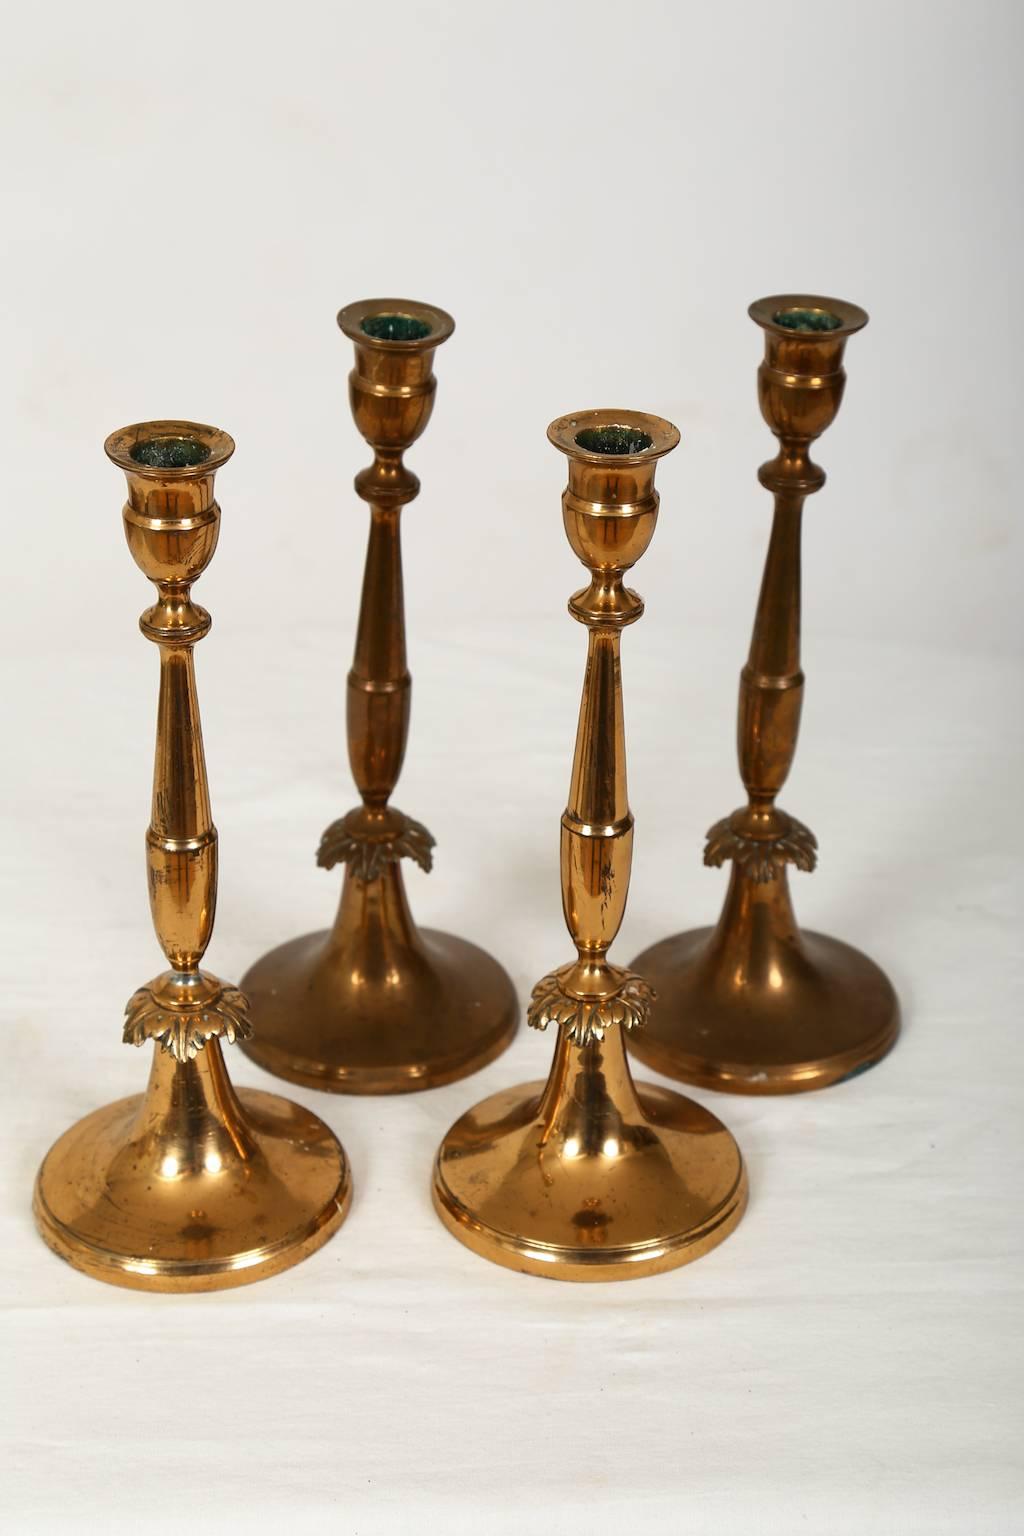 Set of Four Empire Brass Candle Holders, Sweden, circa 1830 In Excellent Condition For Sale In Malmo, SE